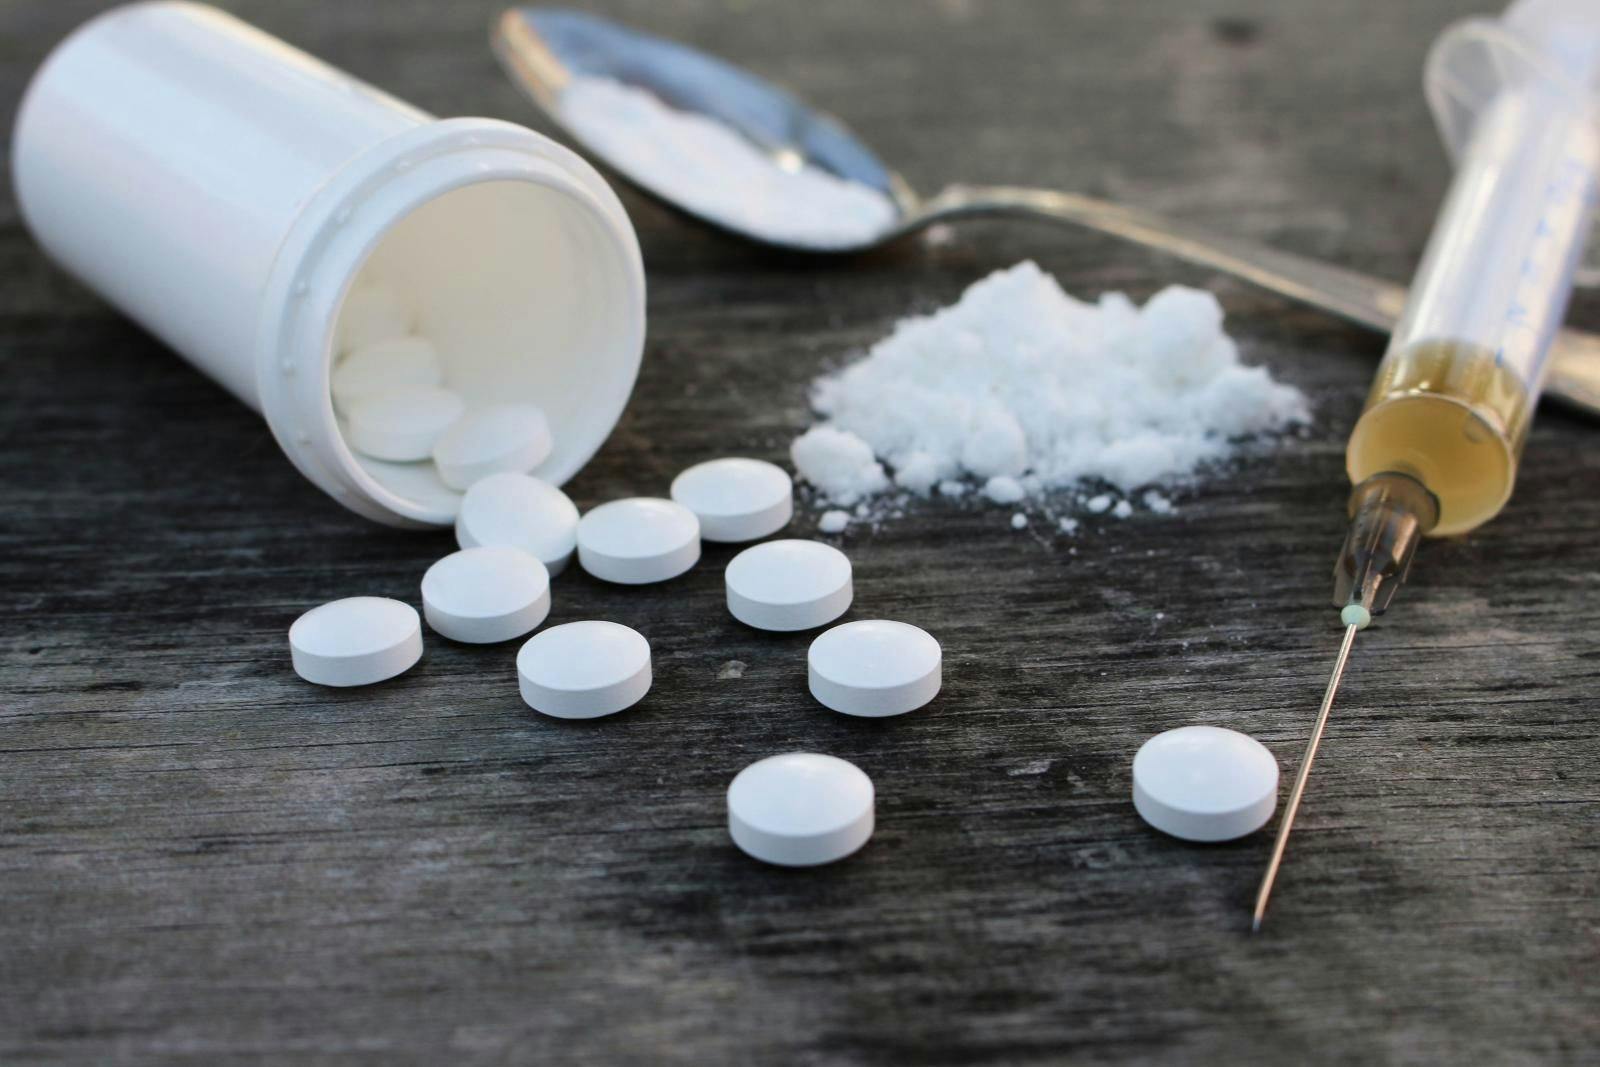 Illicitly Produced Fentanyl: A Growing Cause of Synthetic Opioid Deaths